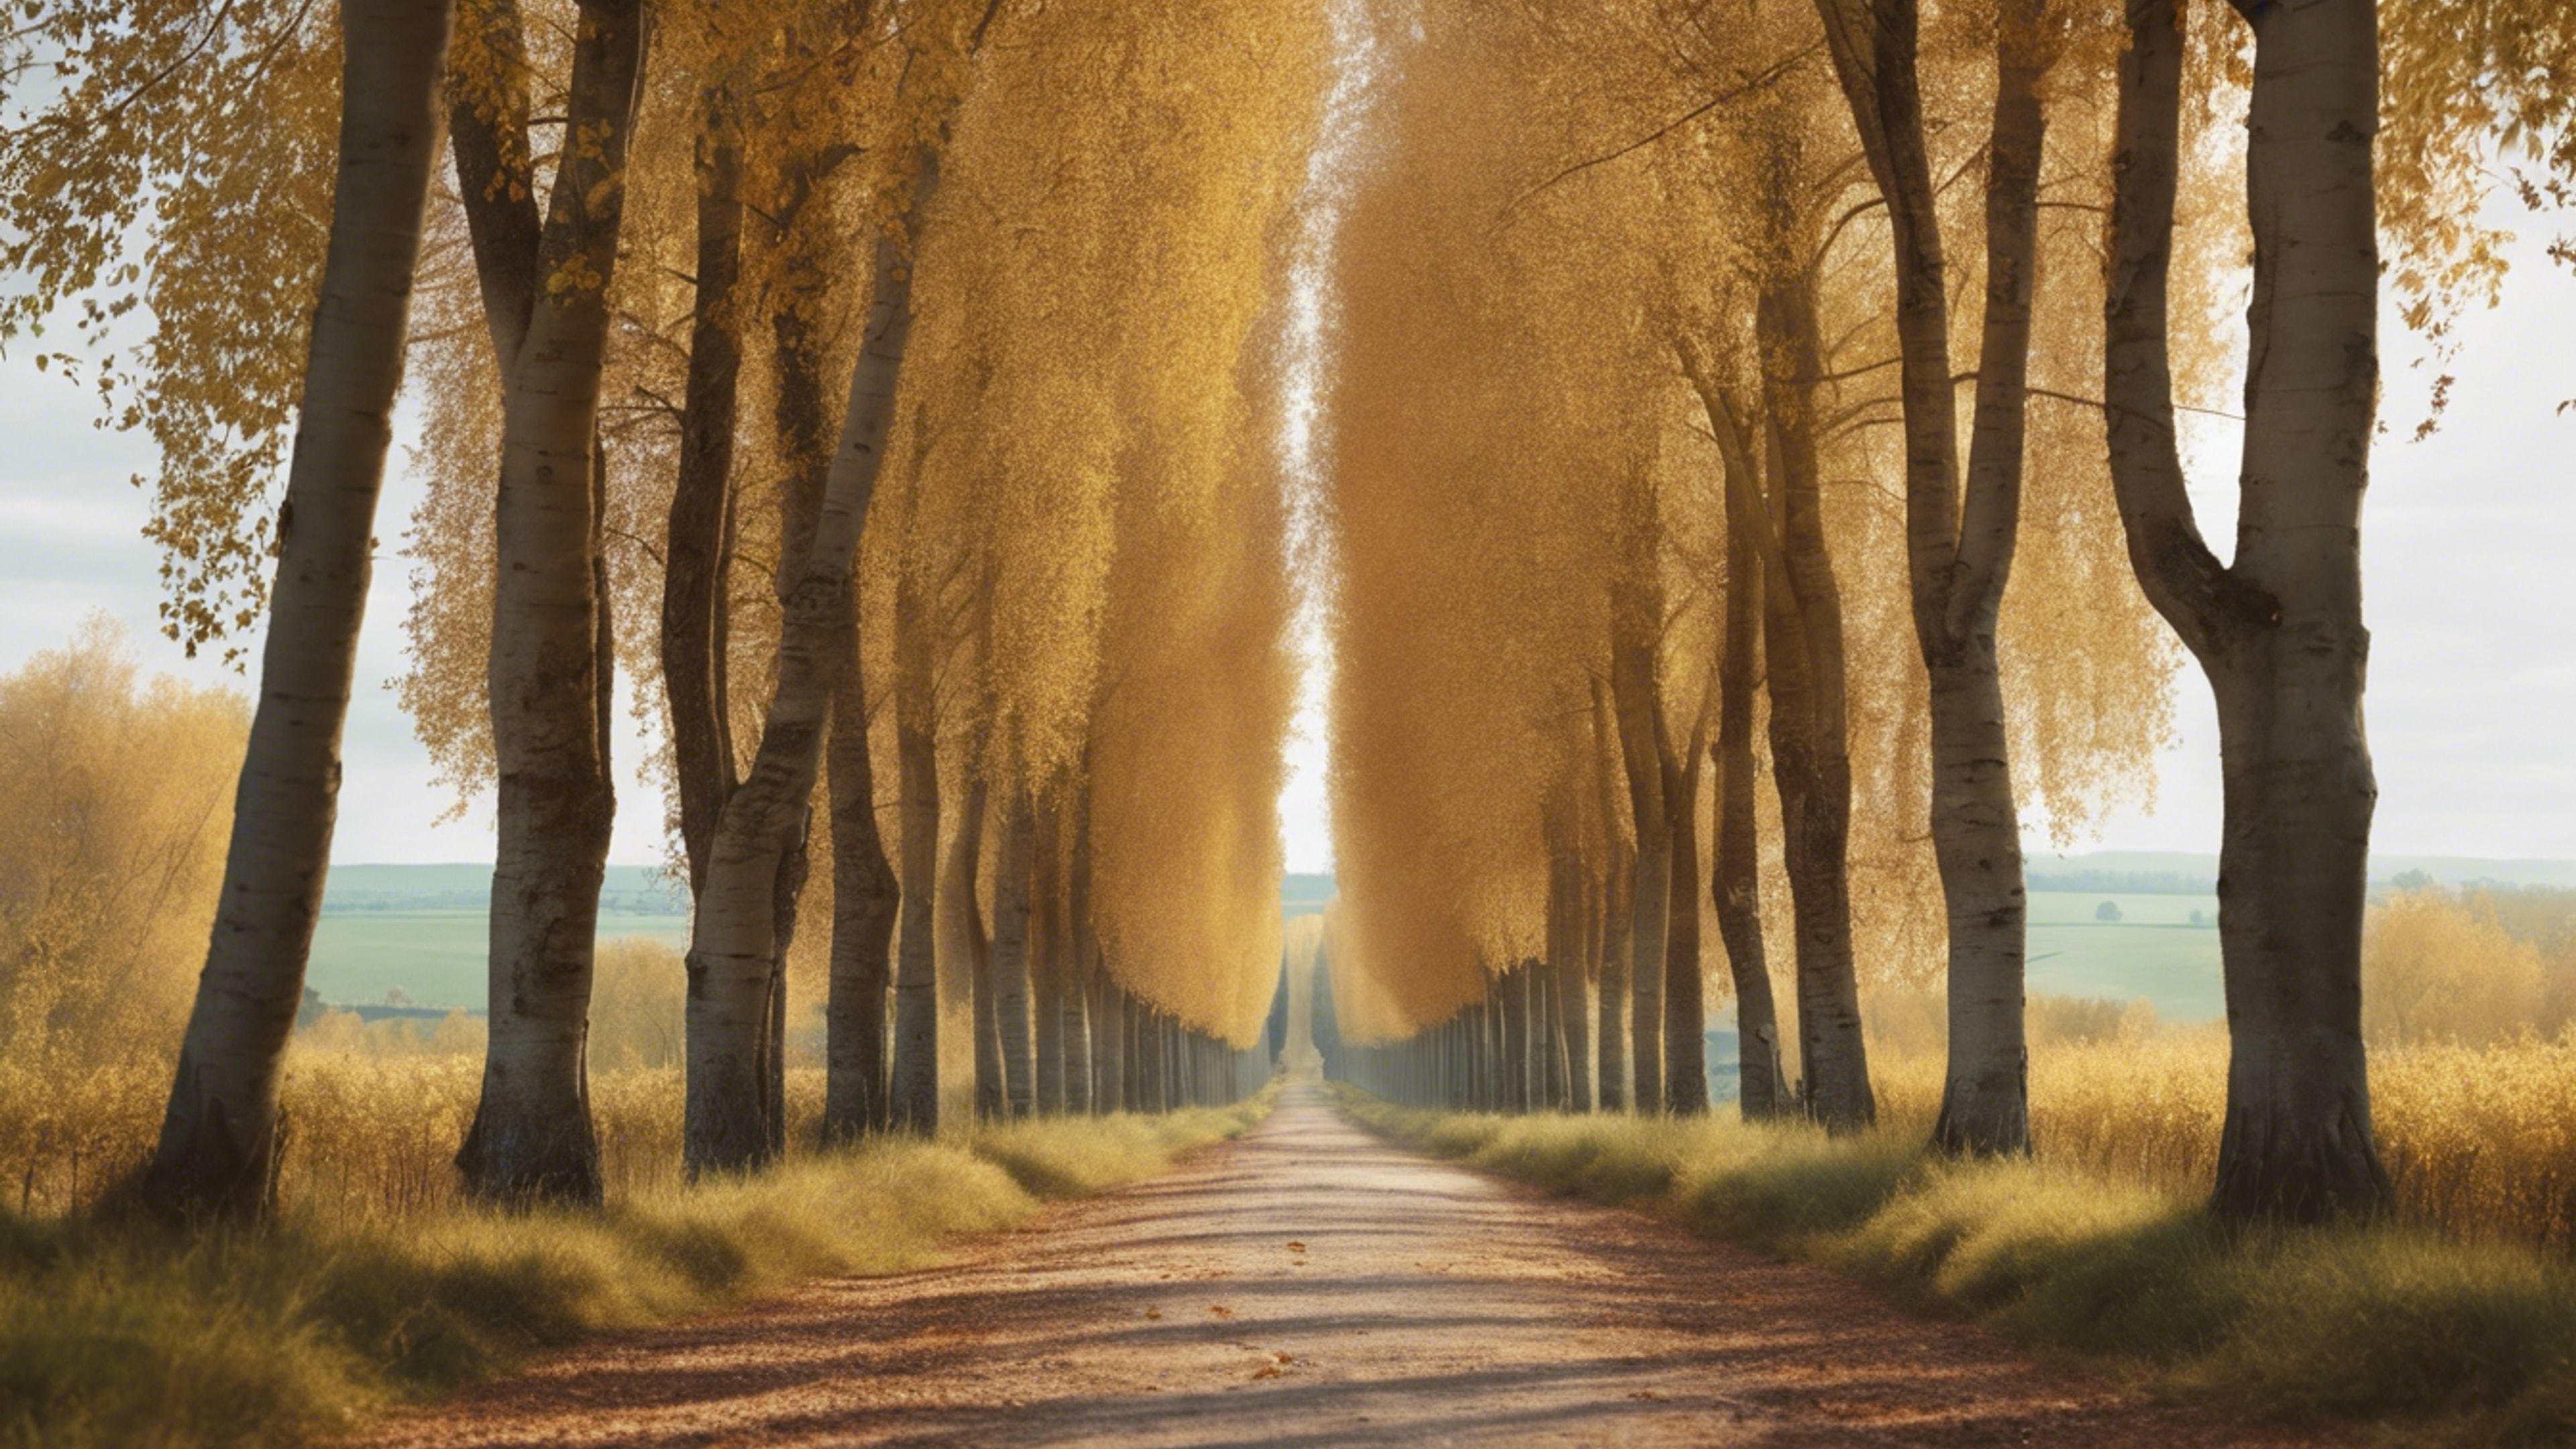 A peaceful French country lane lined with tall, mature poplar trees in autumn. Fondo de pantalla[76d1ad7093004c7494eb]